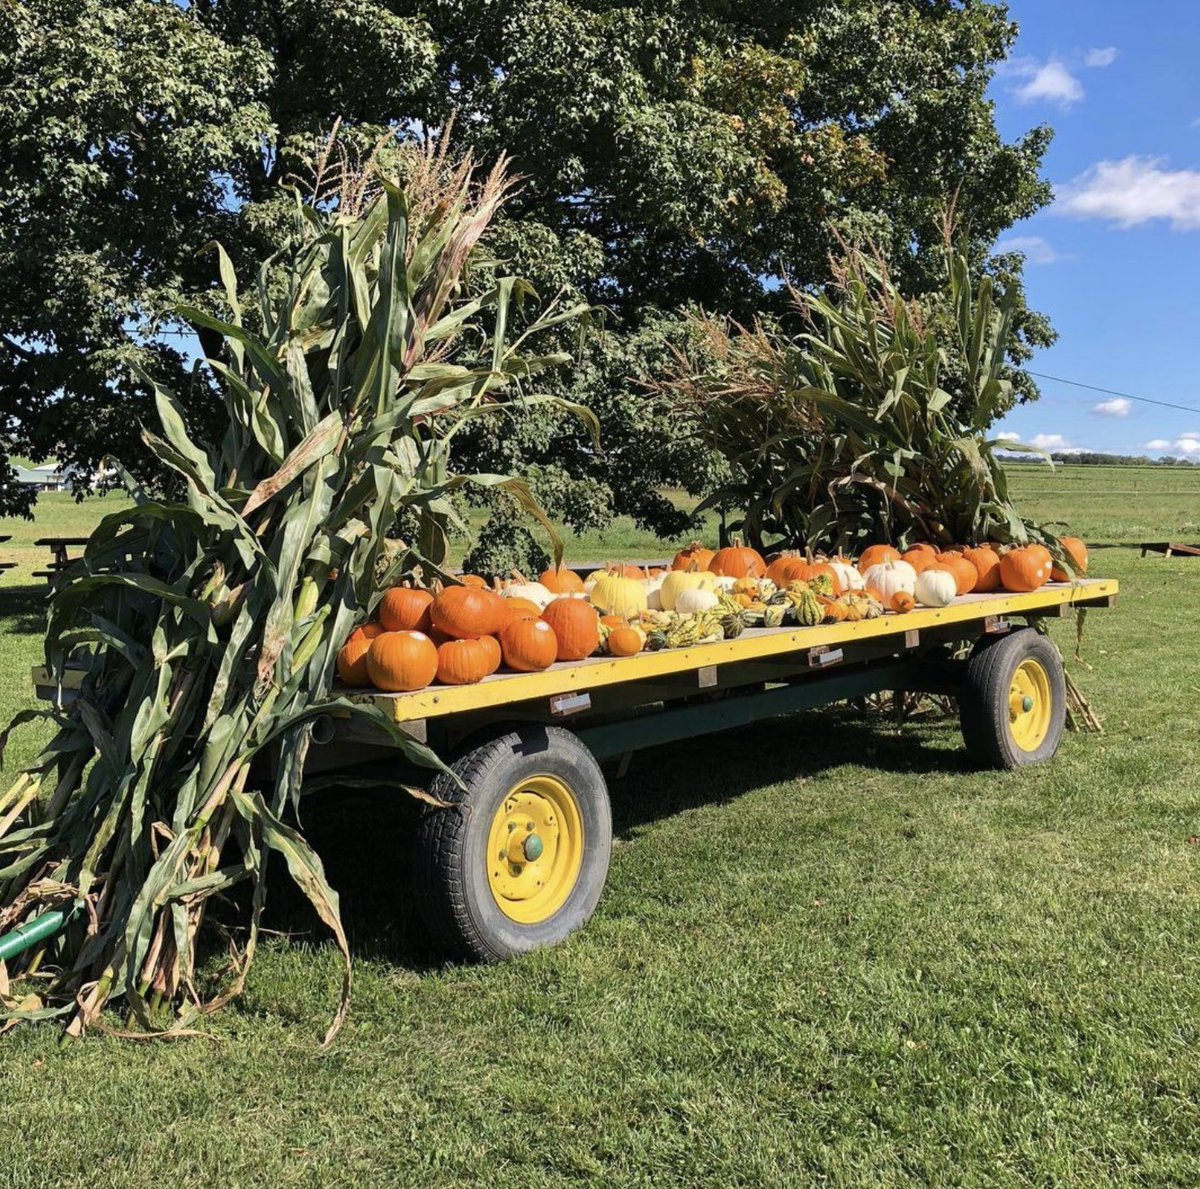 🍂 Join us for Rodale Institute's Fall on the Farm on Oct 8, 10am-4pm. Revel in apple cider, pumpkin painting, live music & organic meals! Don't miss our plant sale & farm tours. Stop by the Visitor Center for a walking tour! 🍎